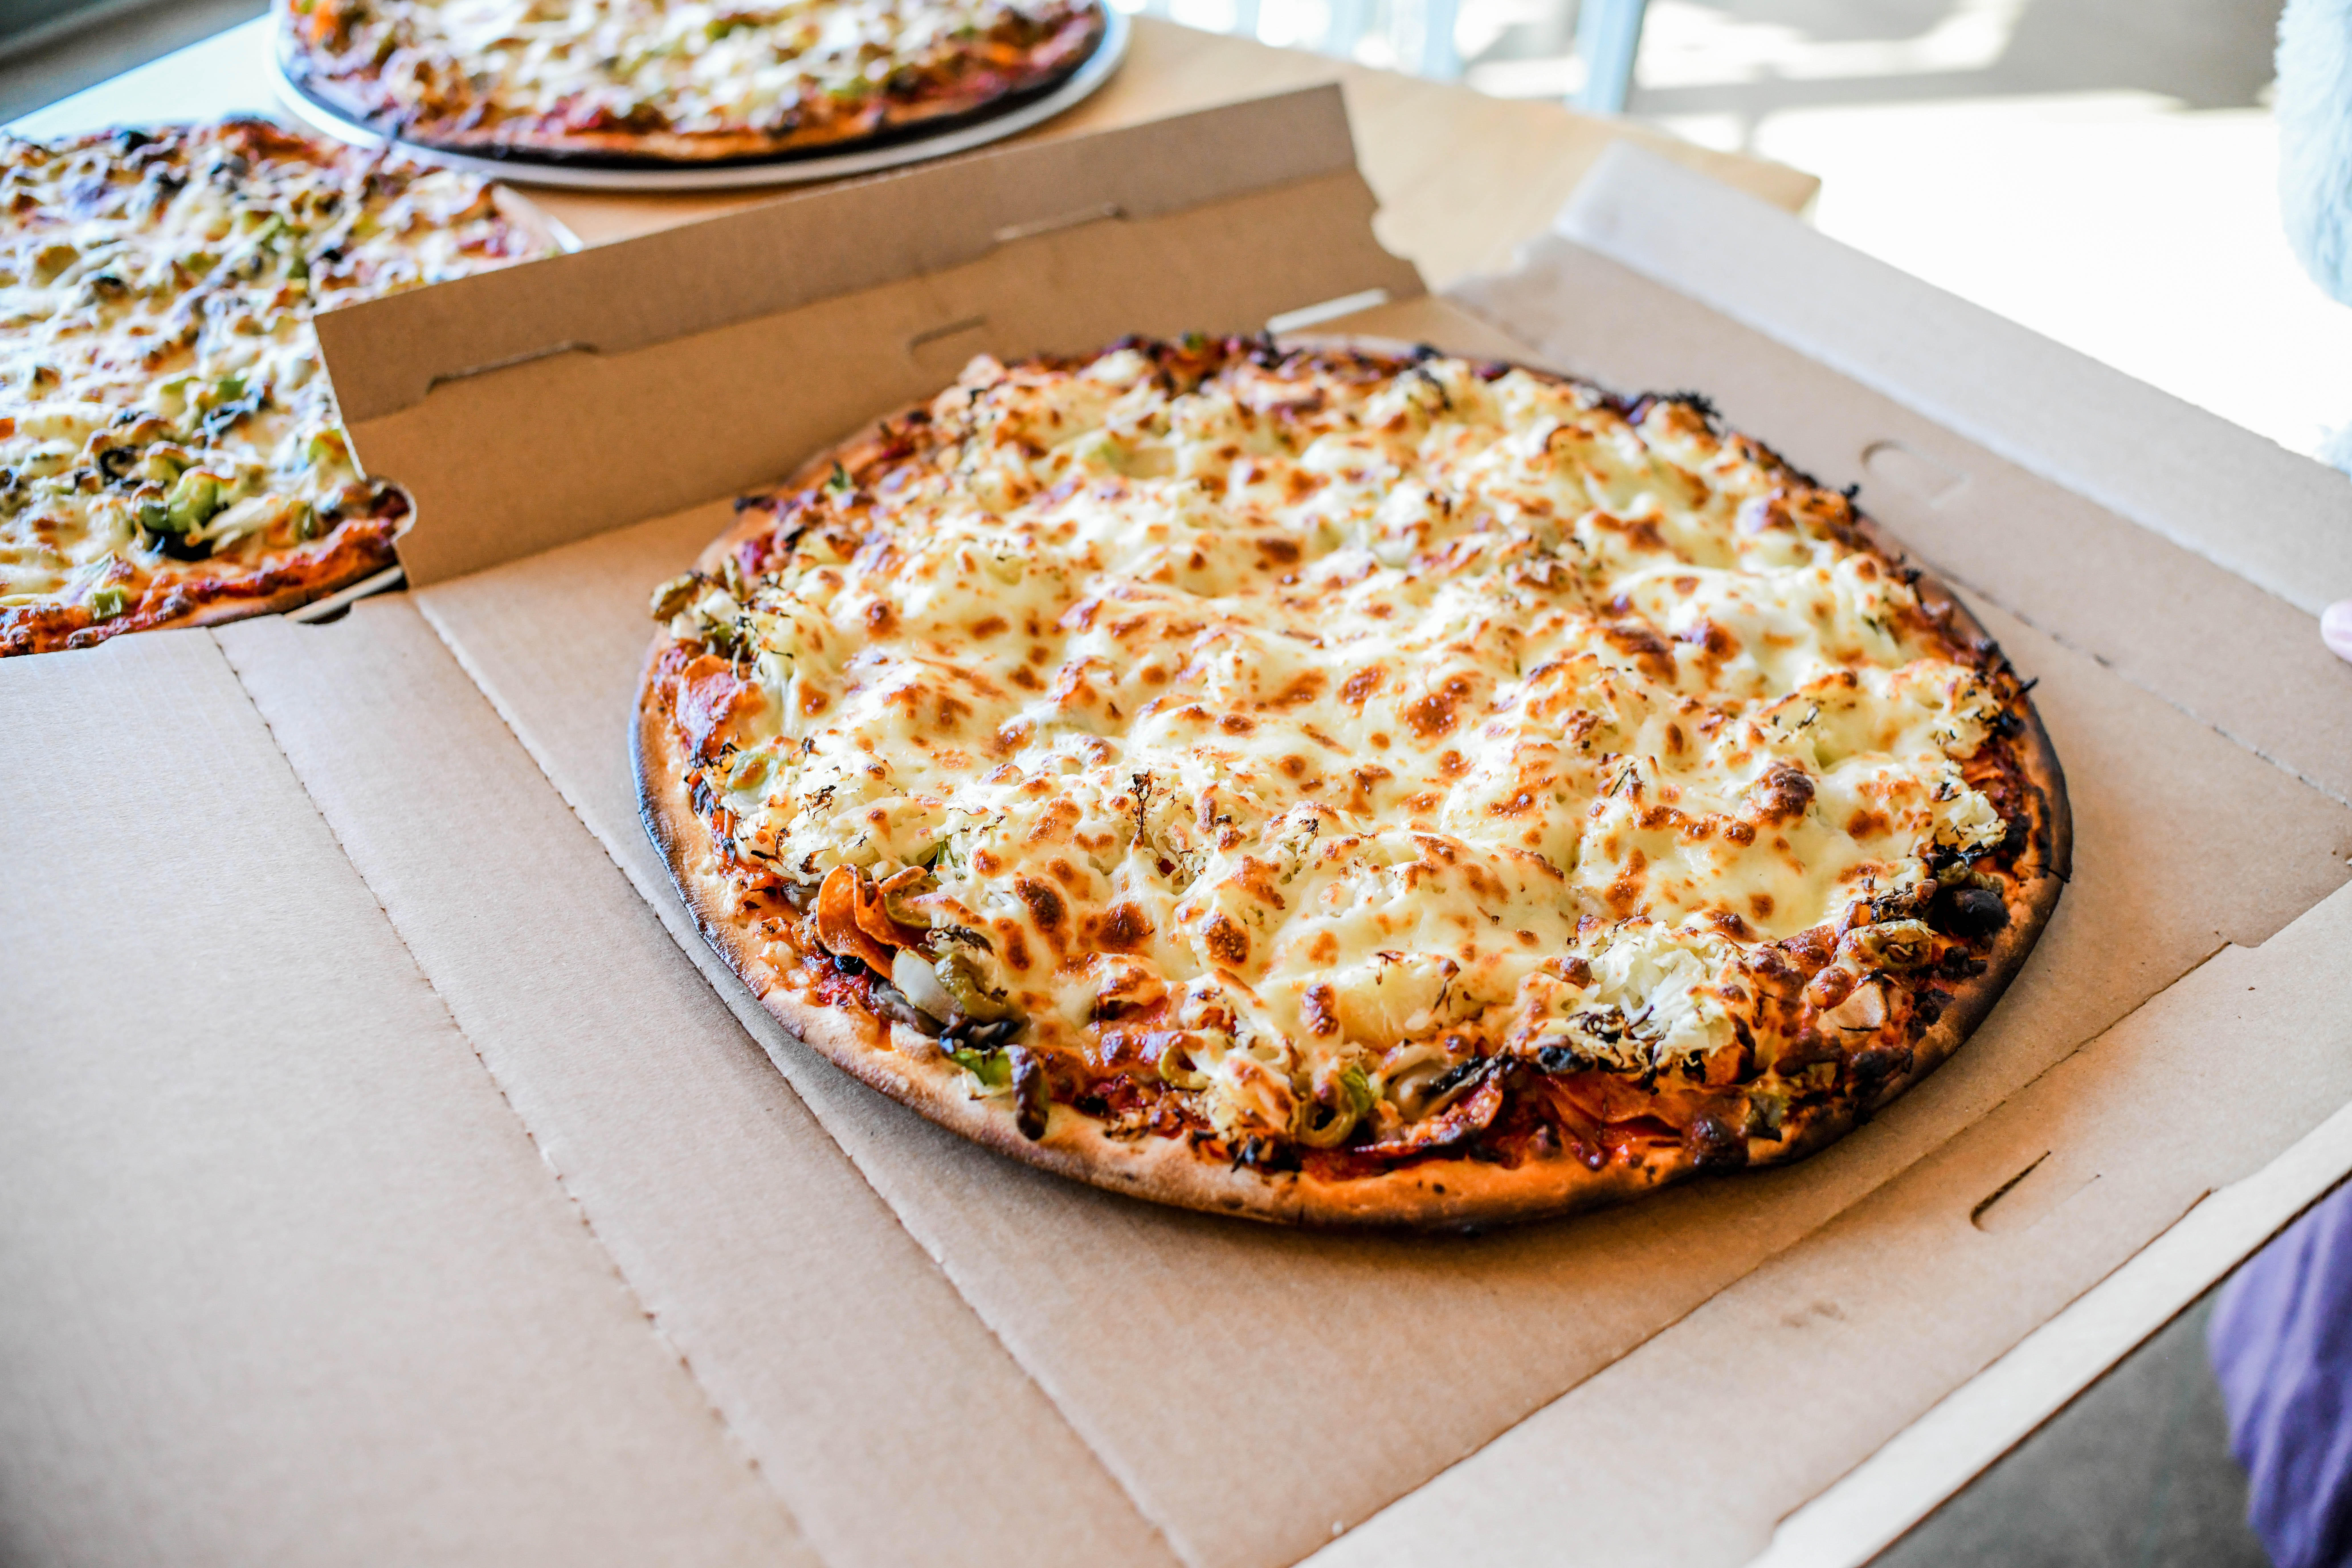 Great for carry-out or delivery! Red's Savoy Pizza Rochester (507)206-3031